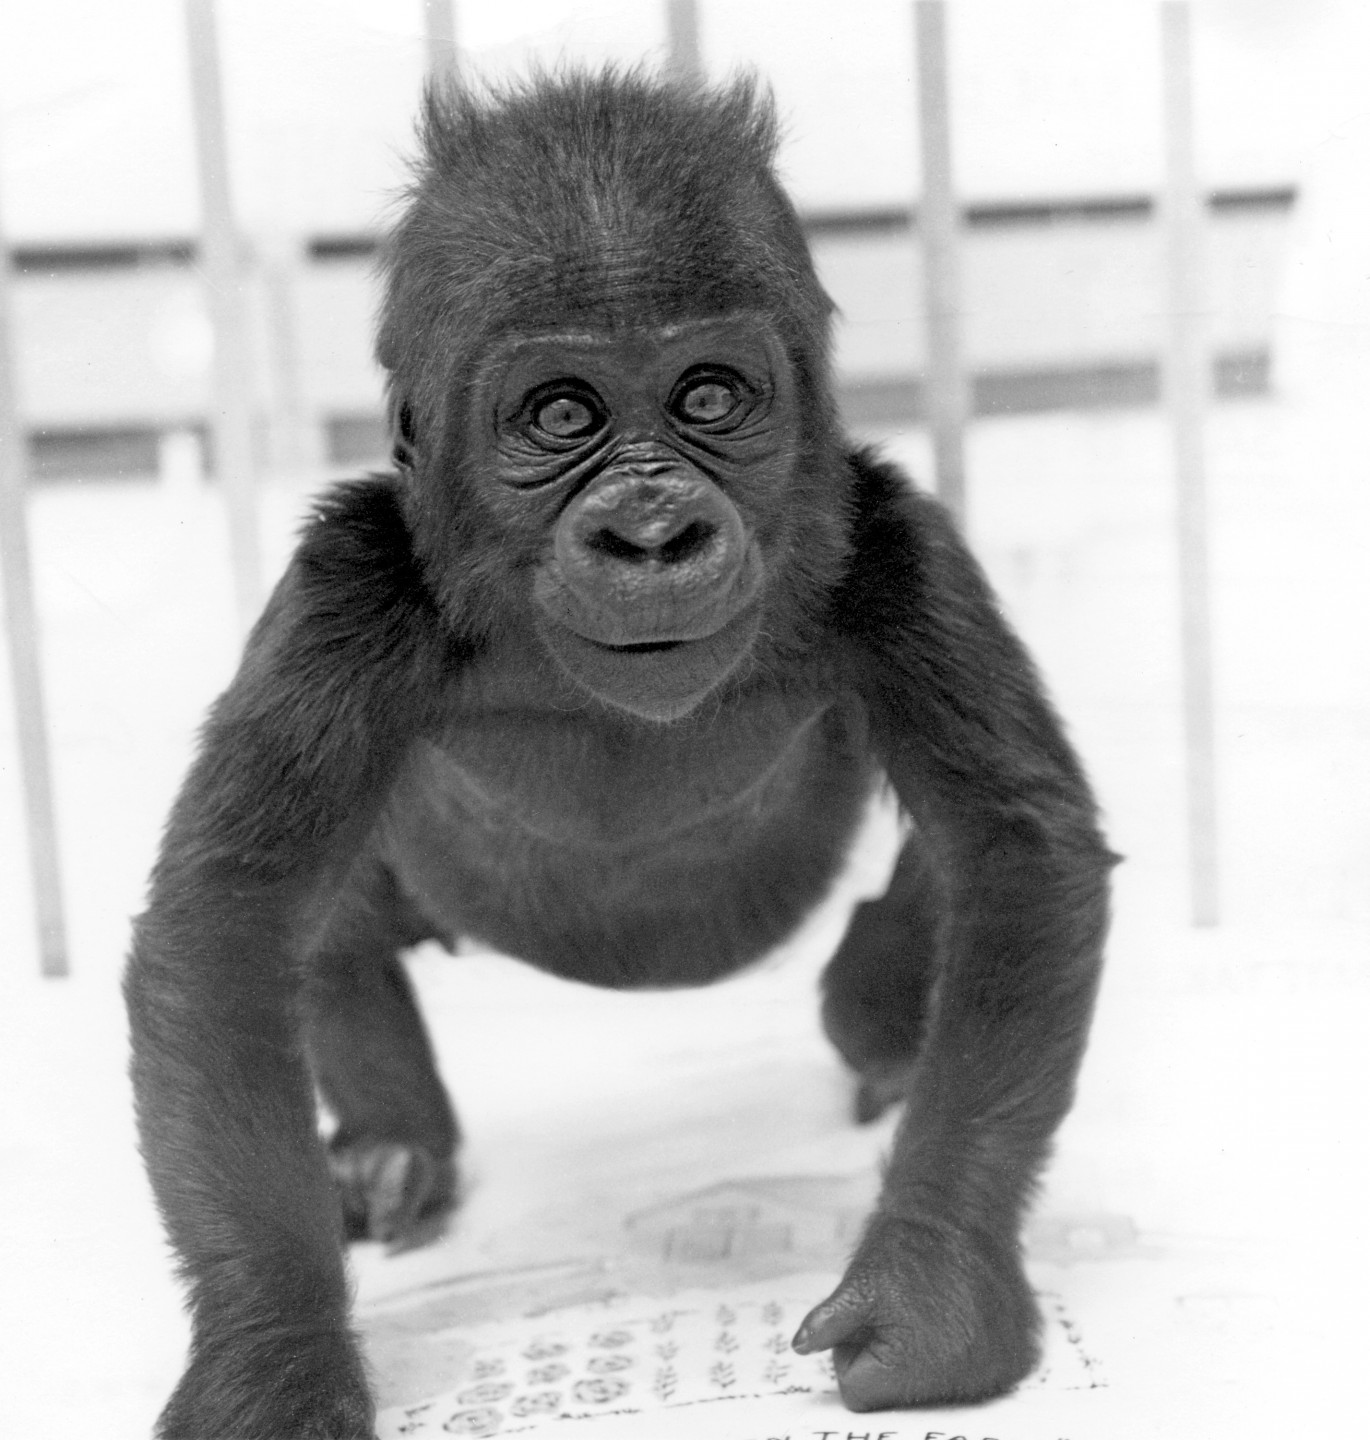 Big news in 1965 was the first birth of a gorilla at the Zoo: Alvila. She was only the seventh gorilla that had been born in any zoo worldwide. Her name was a combination of her father’s, Albert, and her mother’s, Vila.